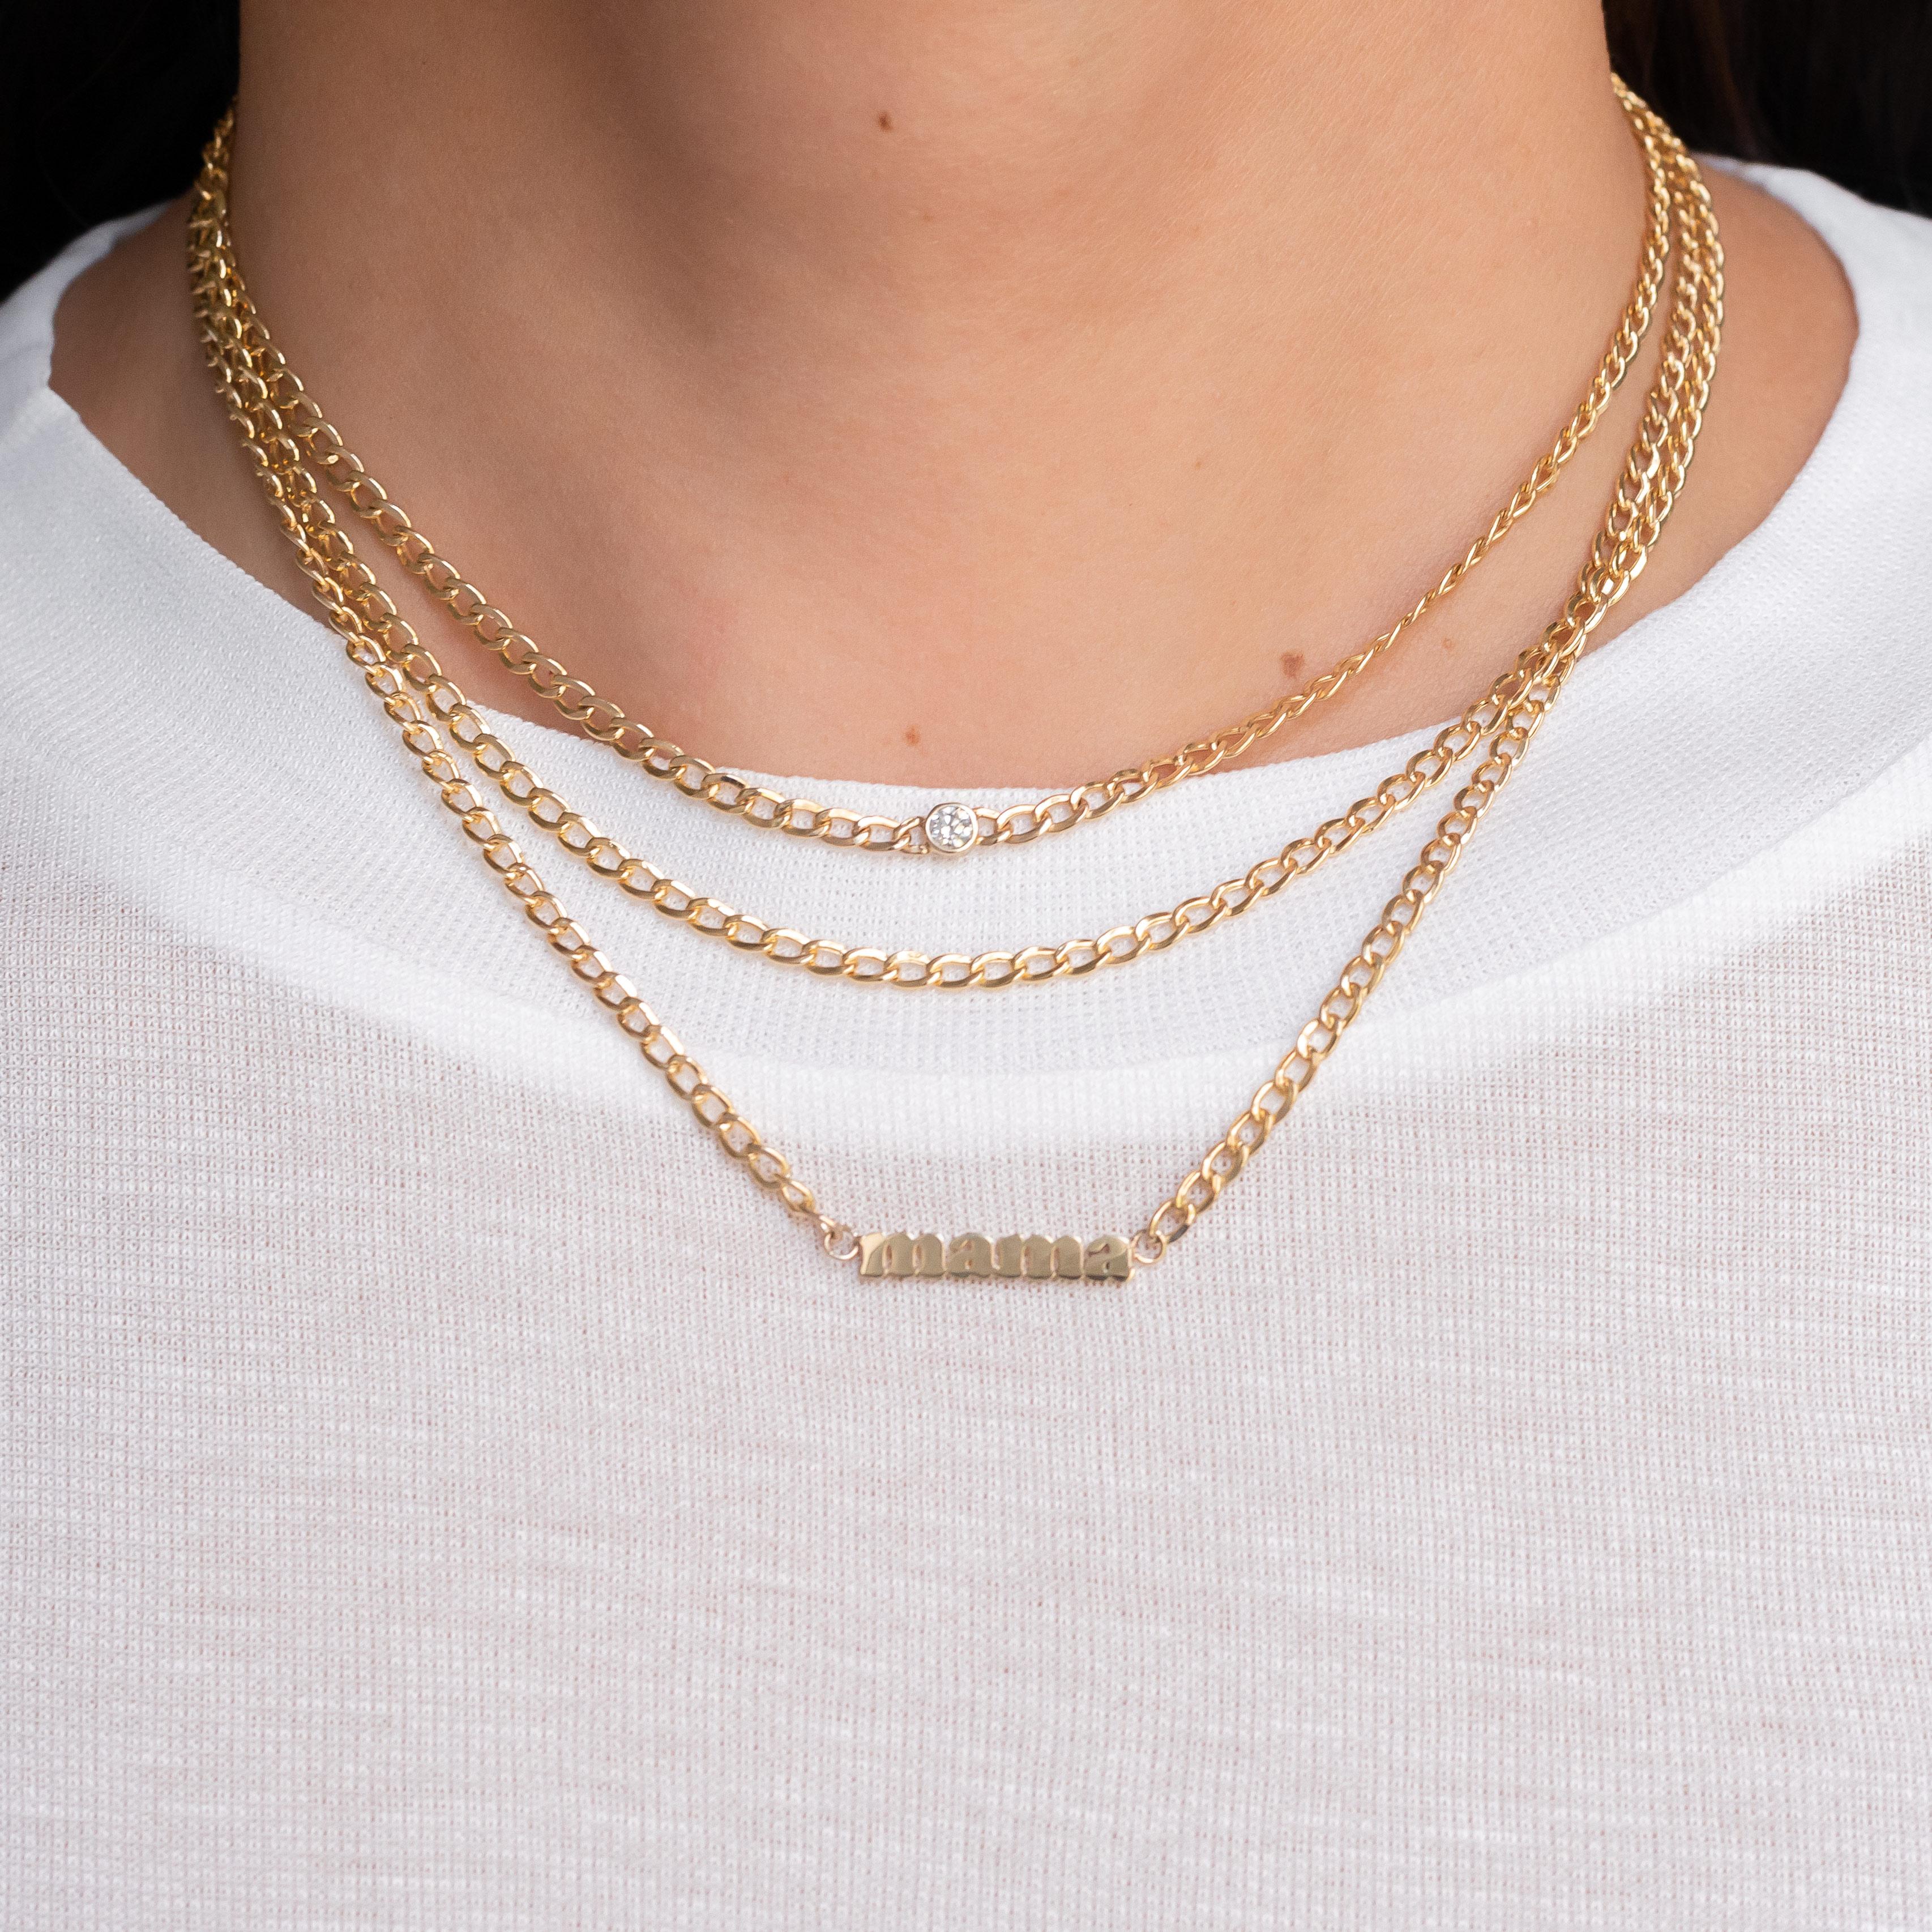 Fun and edgy 14k solid yellow gold Cuban link choker necklace. Wear it up or down by itself or layered, this choker will be your new obsession!

Length: adjustable 12